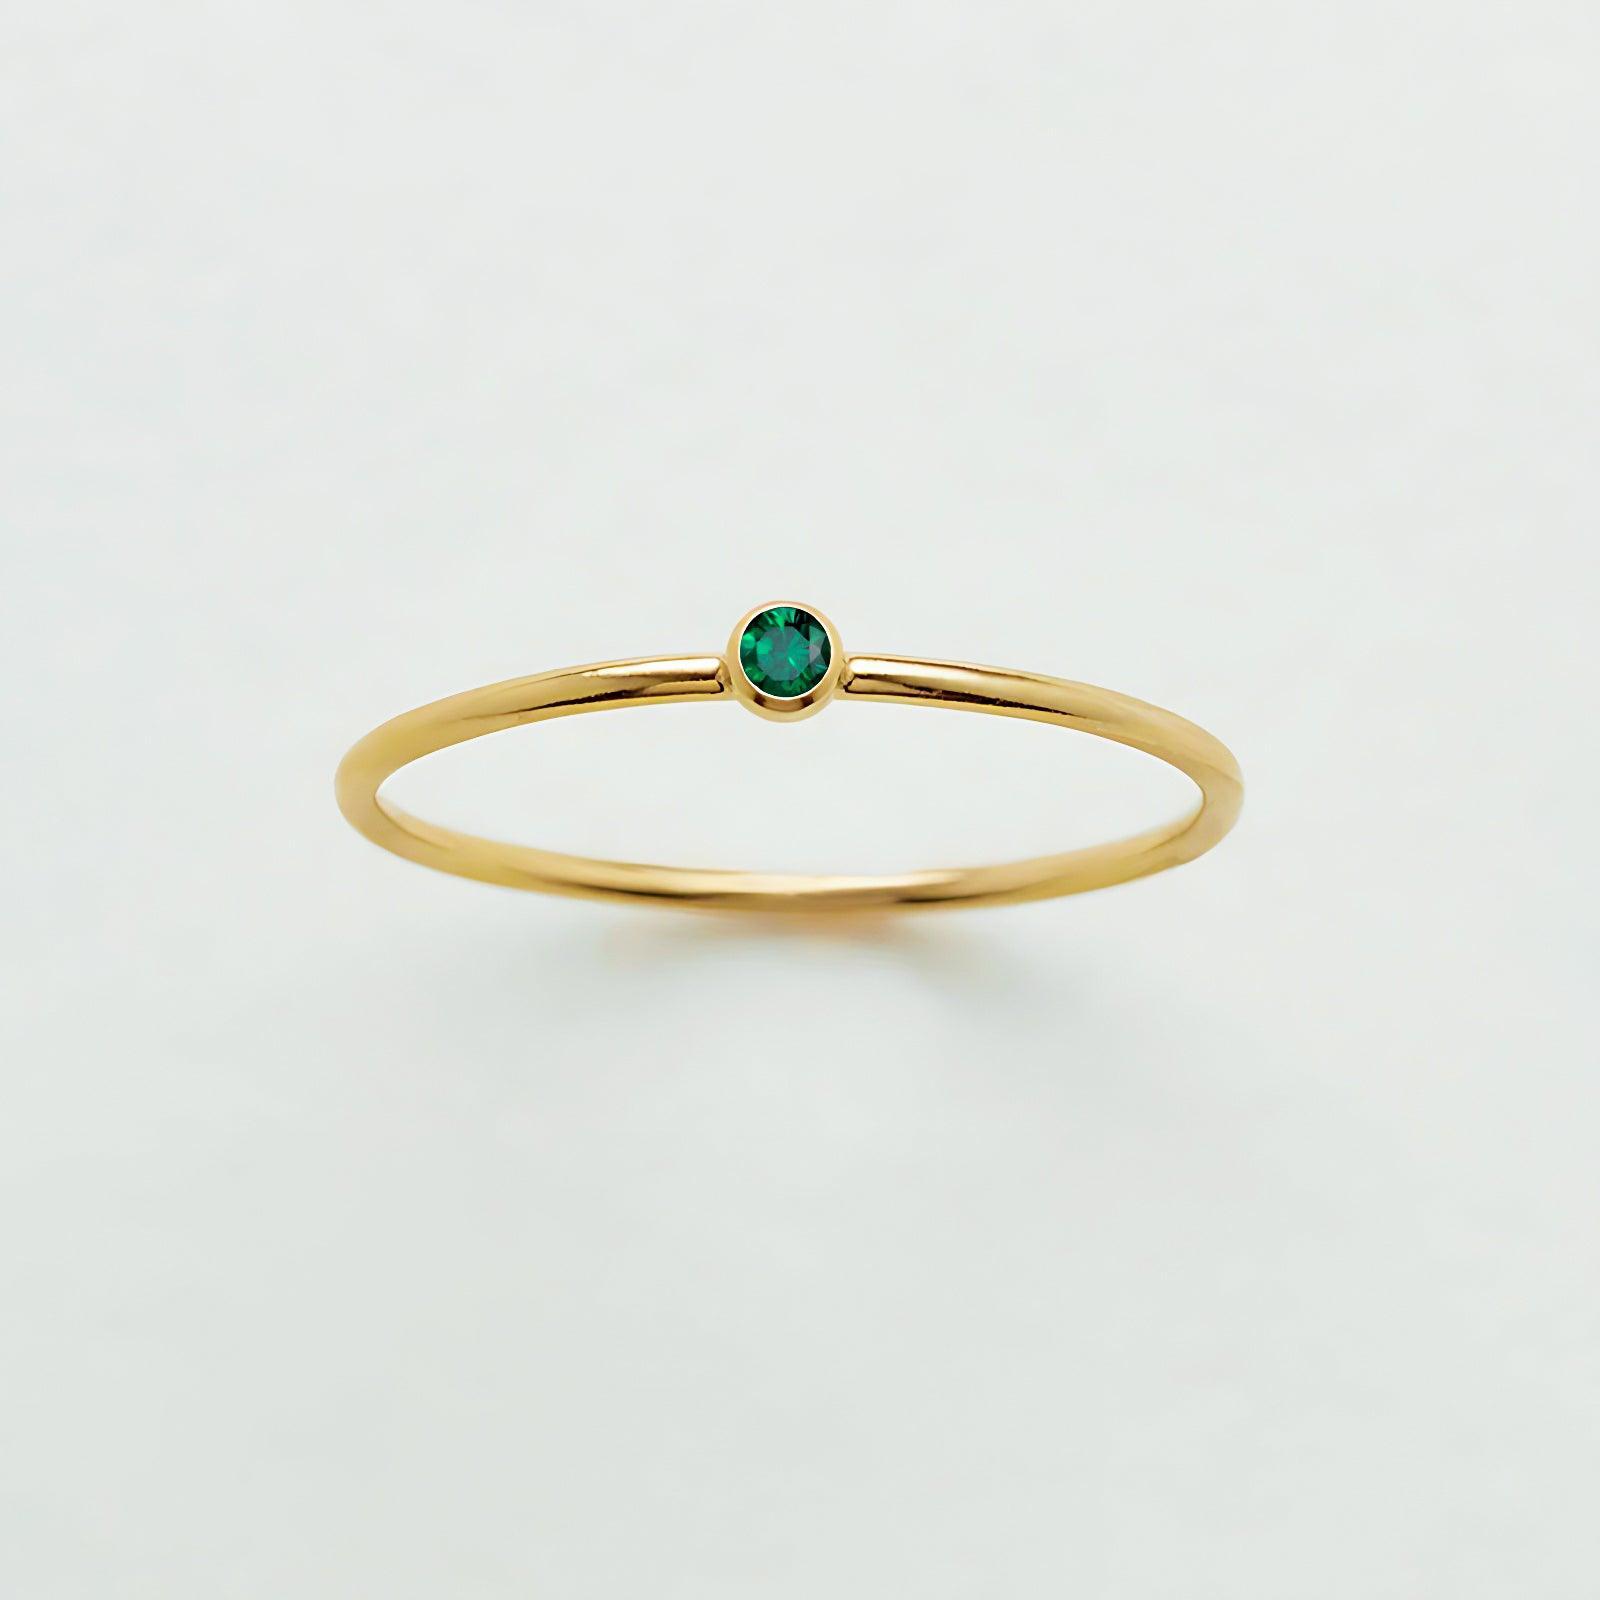 May Birthstone Cute Ring for Christmas 2023 | May Birthstone Cute Ring - undefined | Birthstone Ring, cute ring, may birthstone, May birthstone is Emerald, may birthstone jewelry, S925 Silver Vintage Cute Ring, Sterling Silver s925 cute Ring | From Hunny Life | hunnylife.com